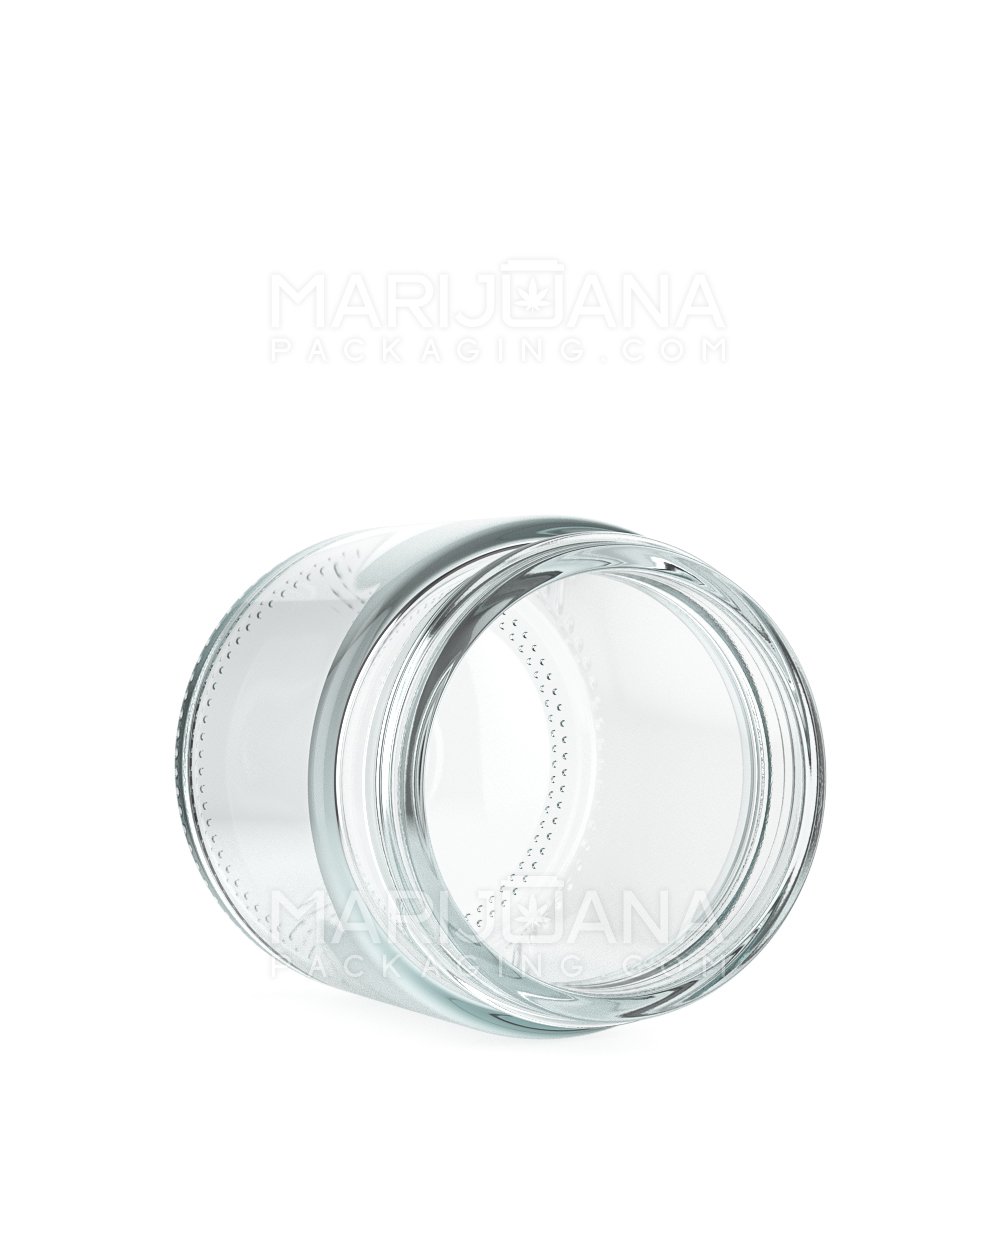 Straight Sided Clear Glass Jars | 50mm - 3oz - 150 Count